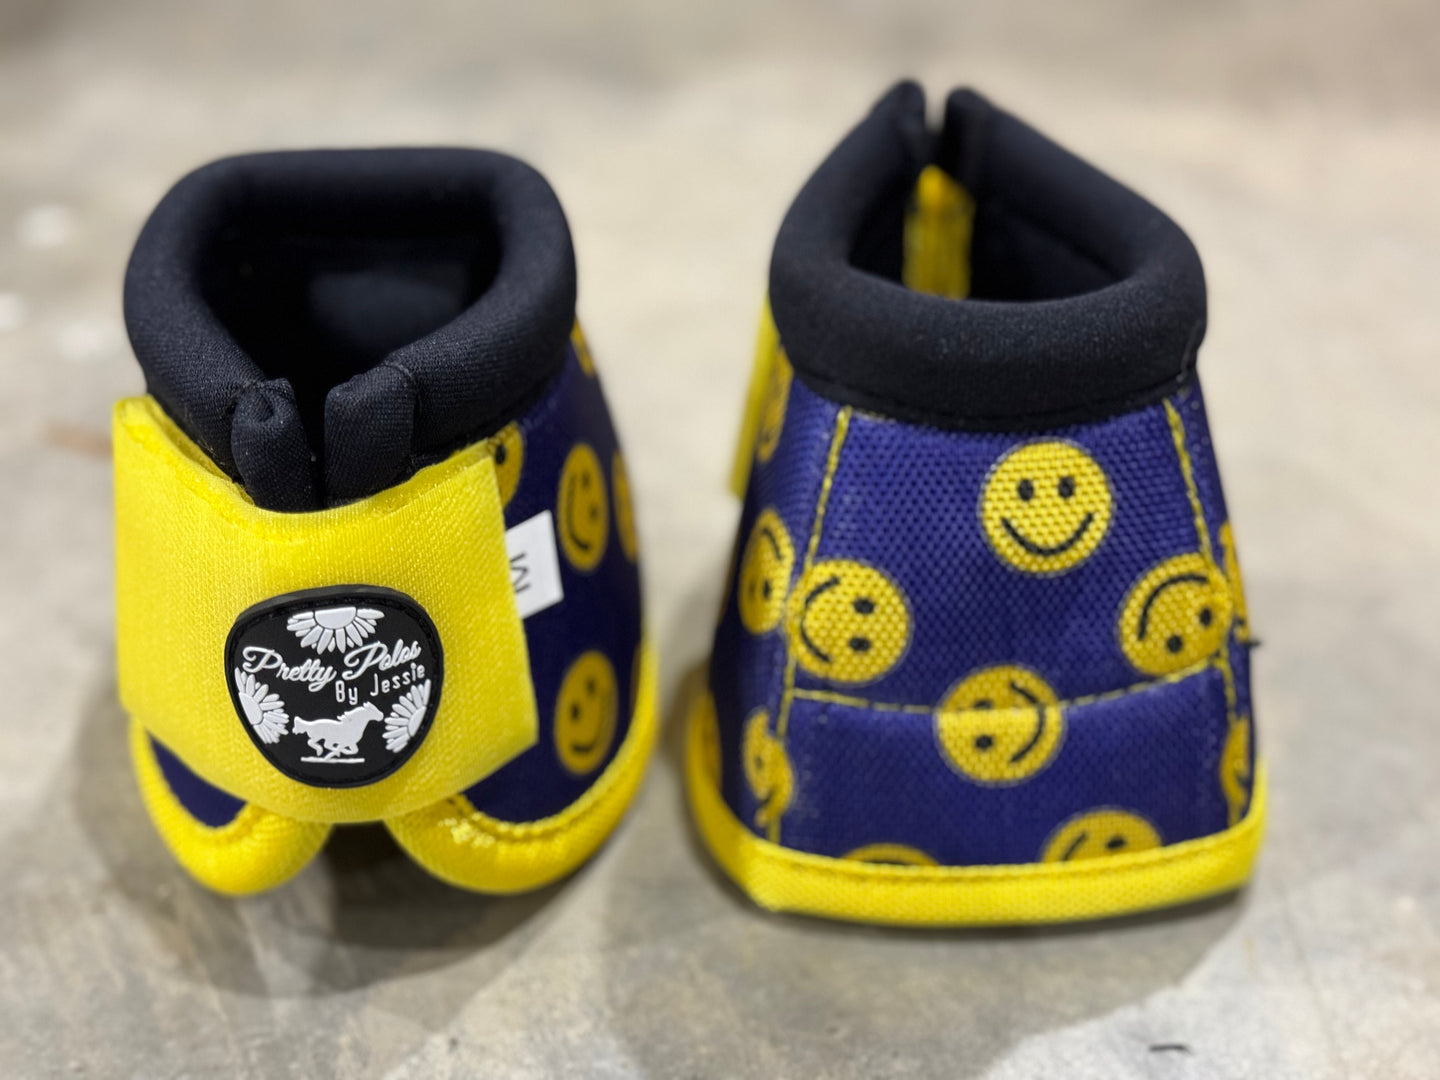 Smiley Bell Boots